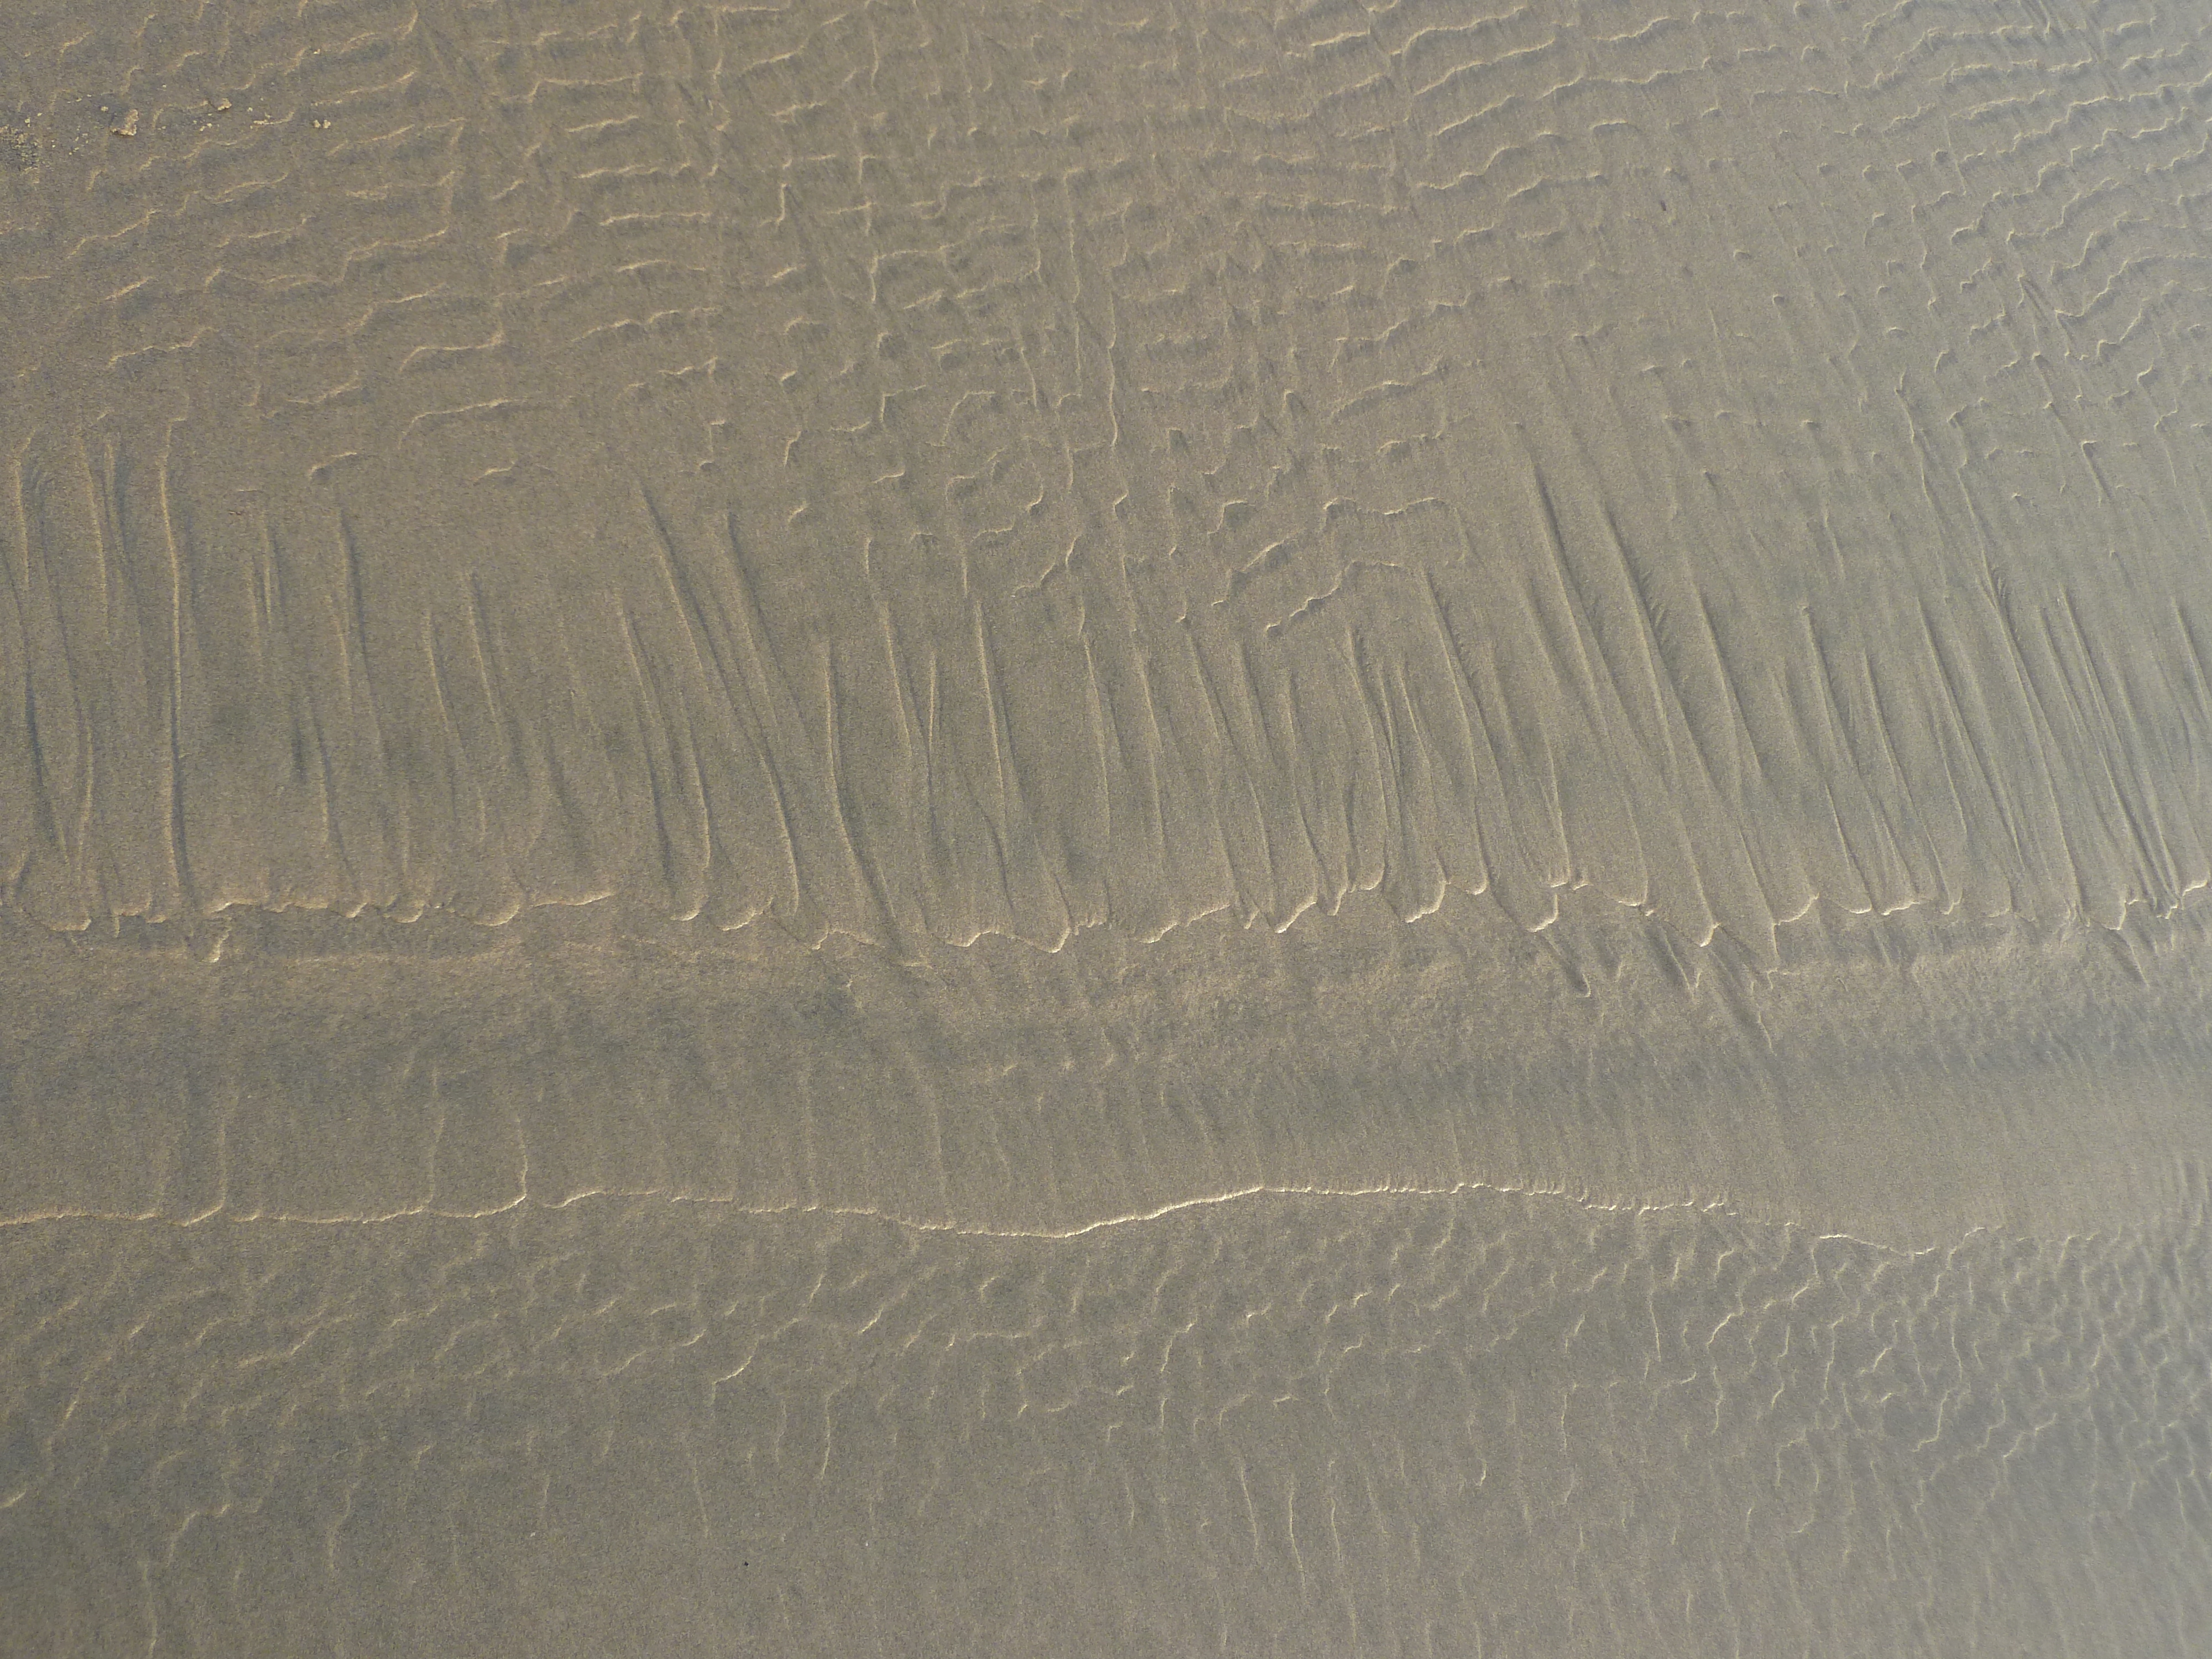 Sand Formations Made by the Wind